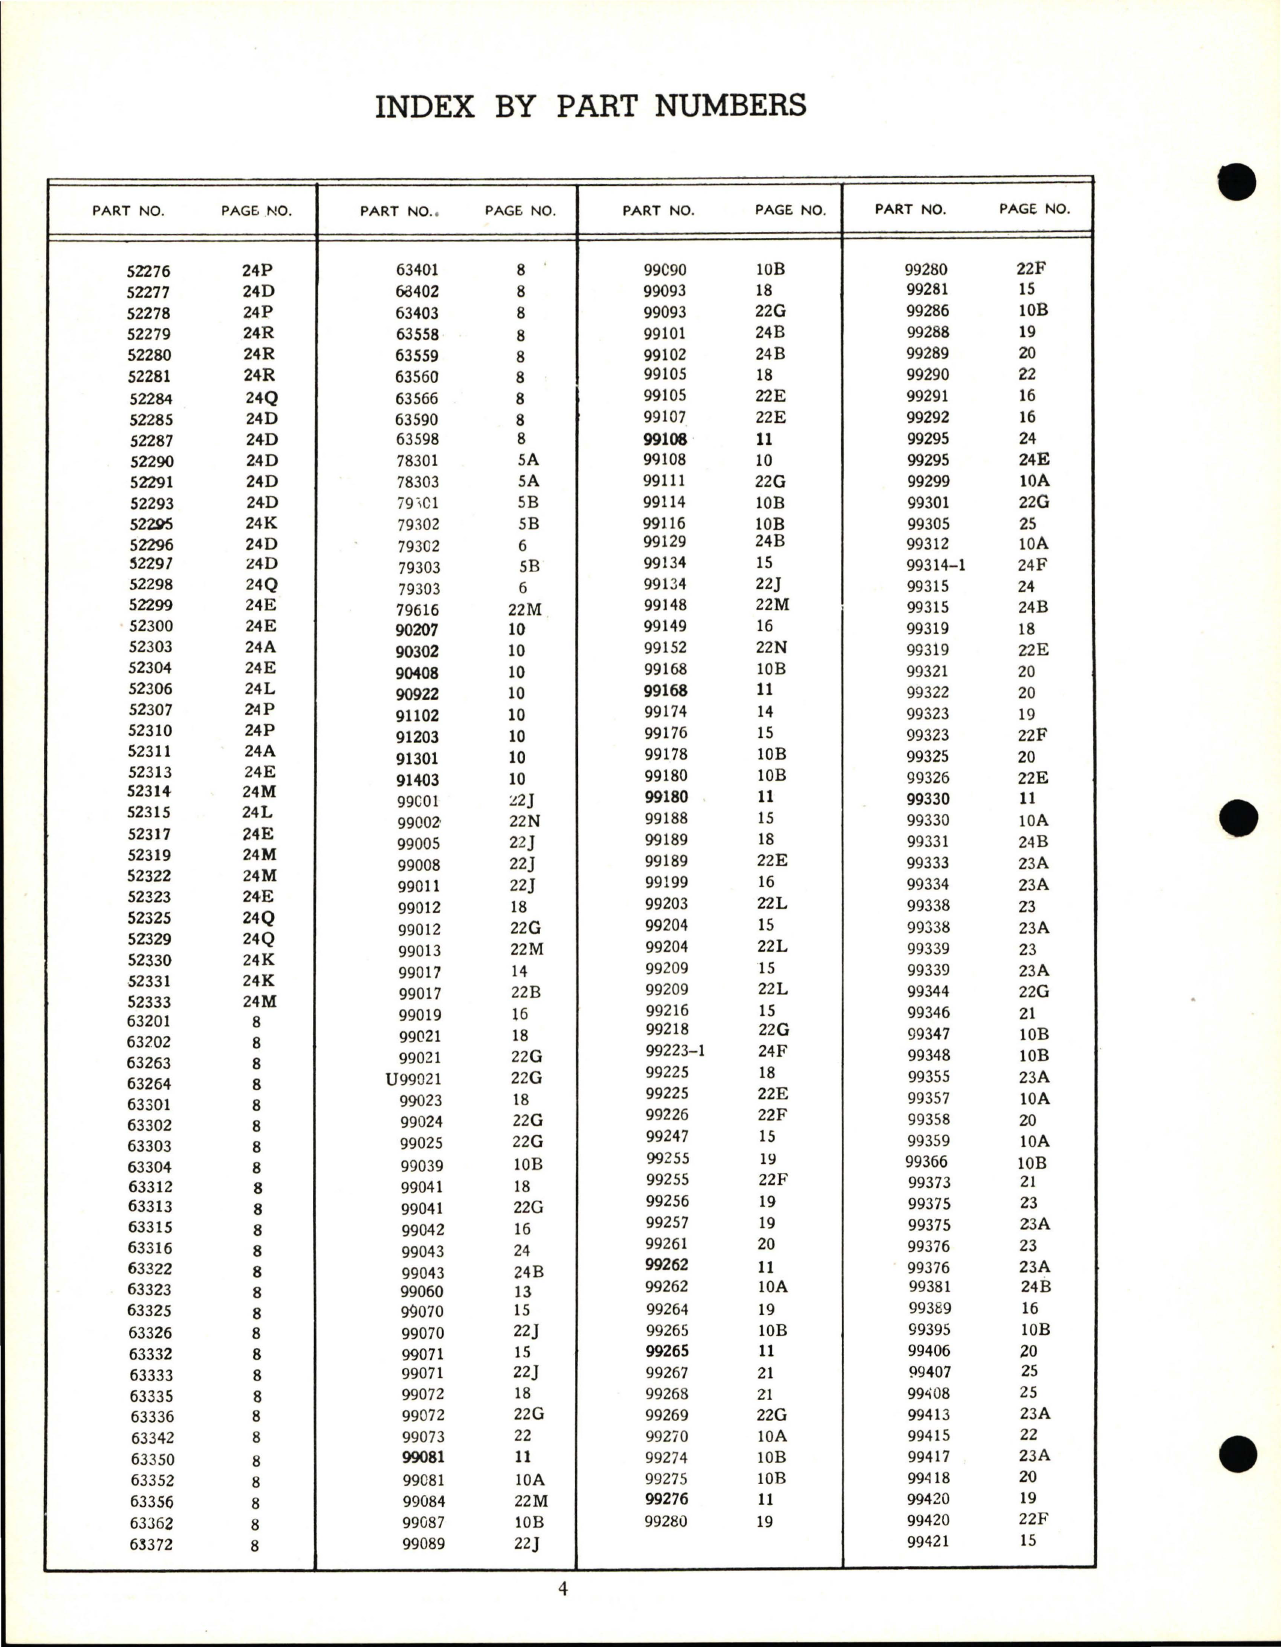 Sample page 7 from AirCorps Library document: DOT Fasteners - Engineering Data Catalog